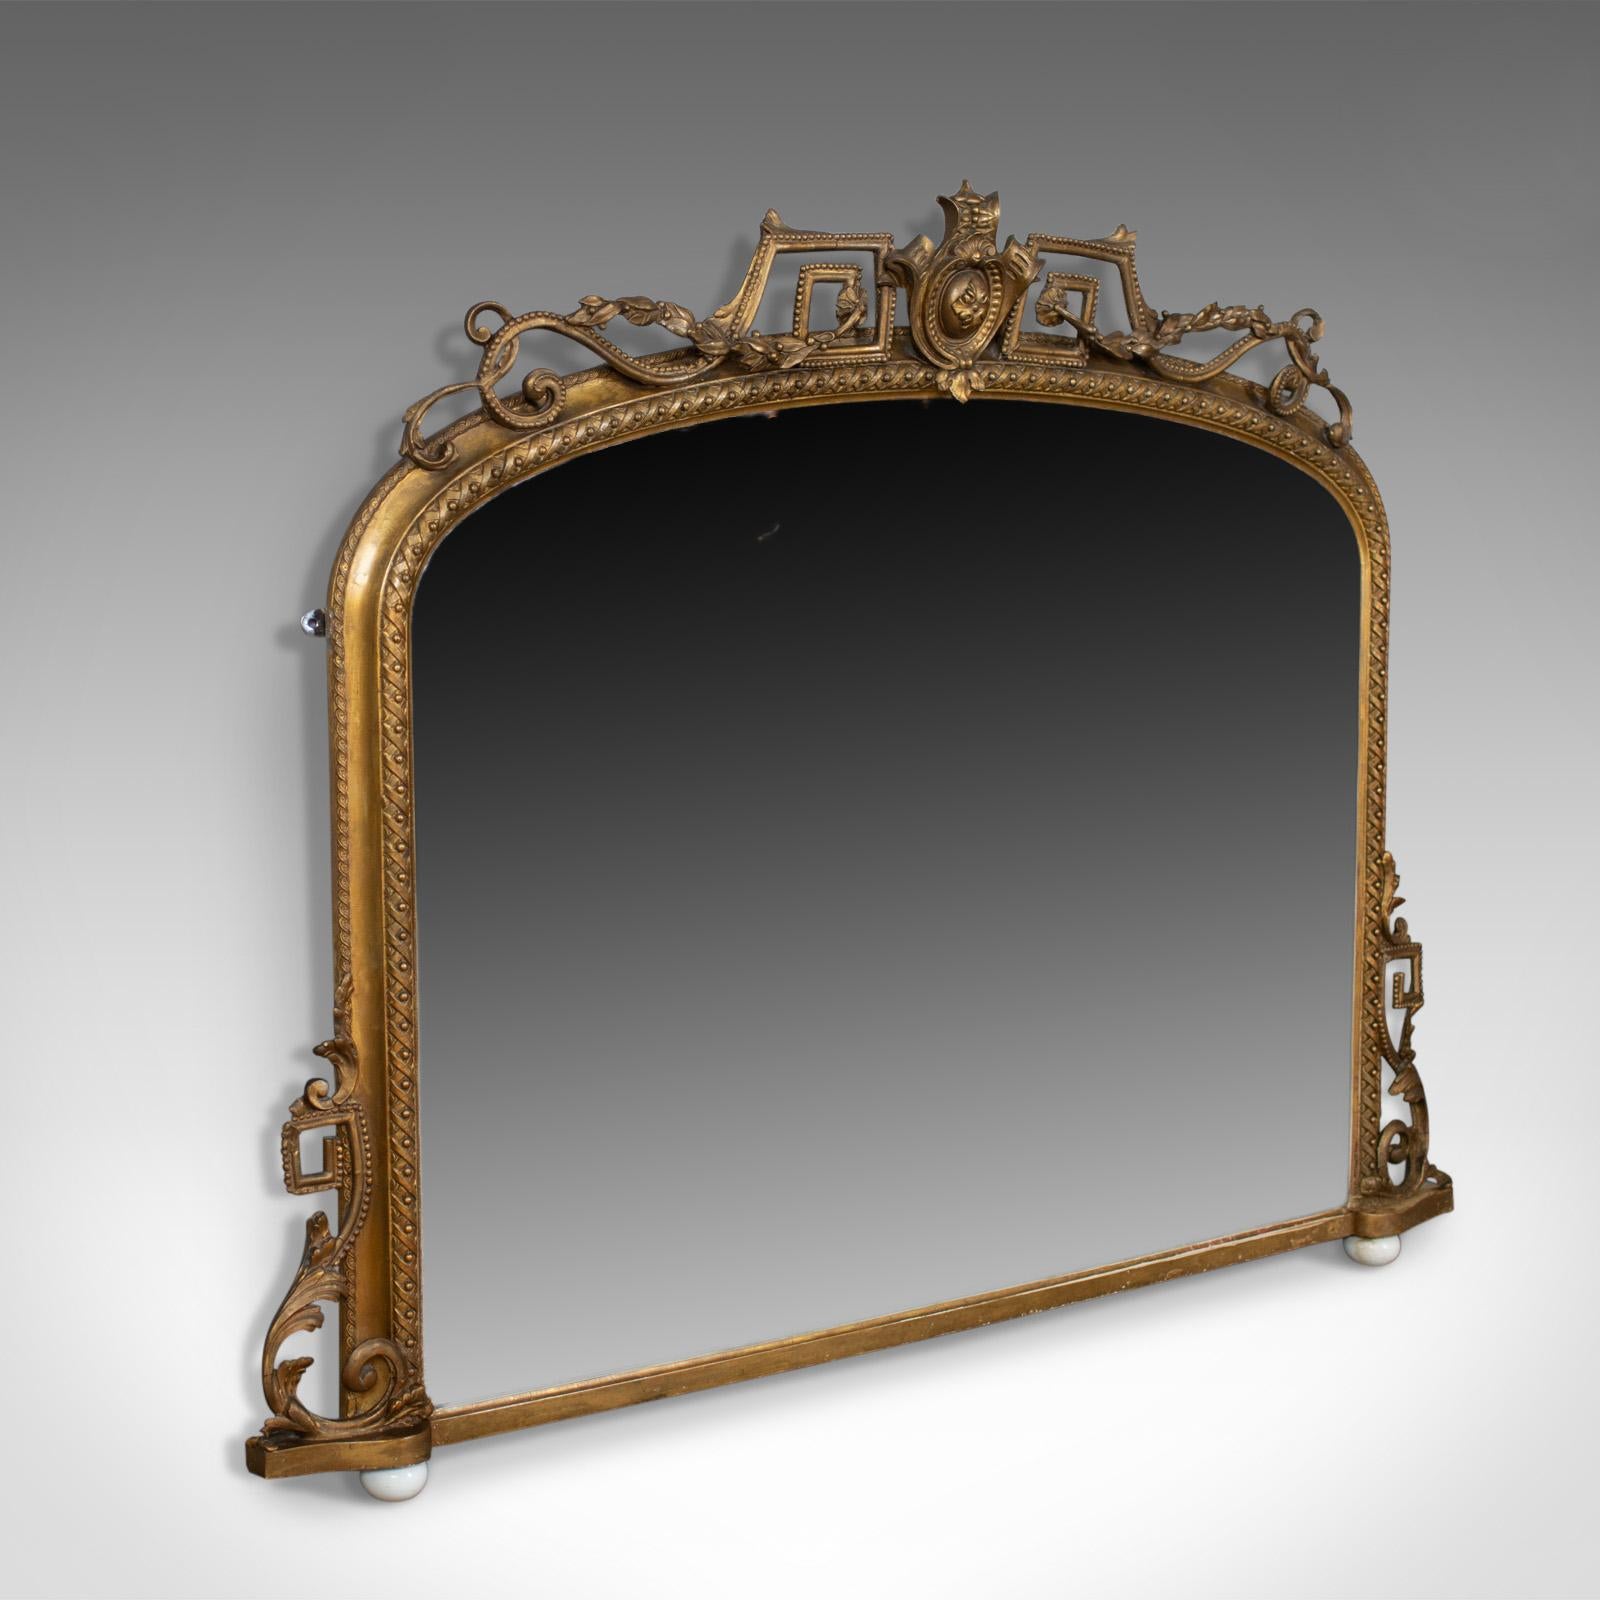 This is an antique overmantel mirror, a mid-sized, English, Regency wall mirror in giltwood frame dating to circa 1820.

Attractive mellow golden tones in the giltwood frame
A refined piece displaying classical overtones
Dome form with old